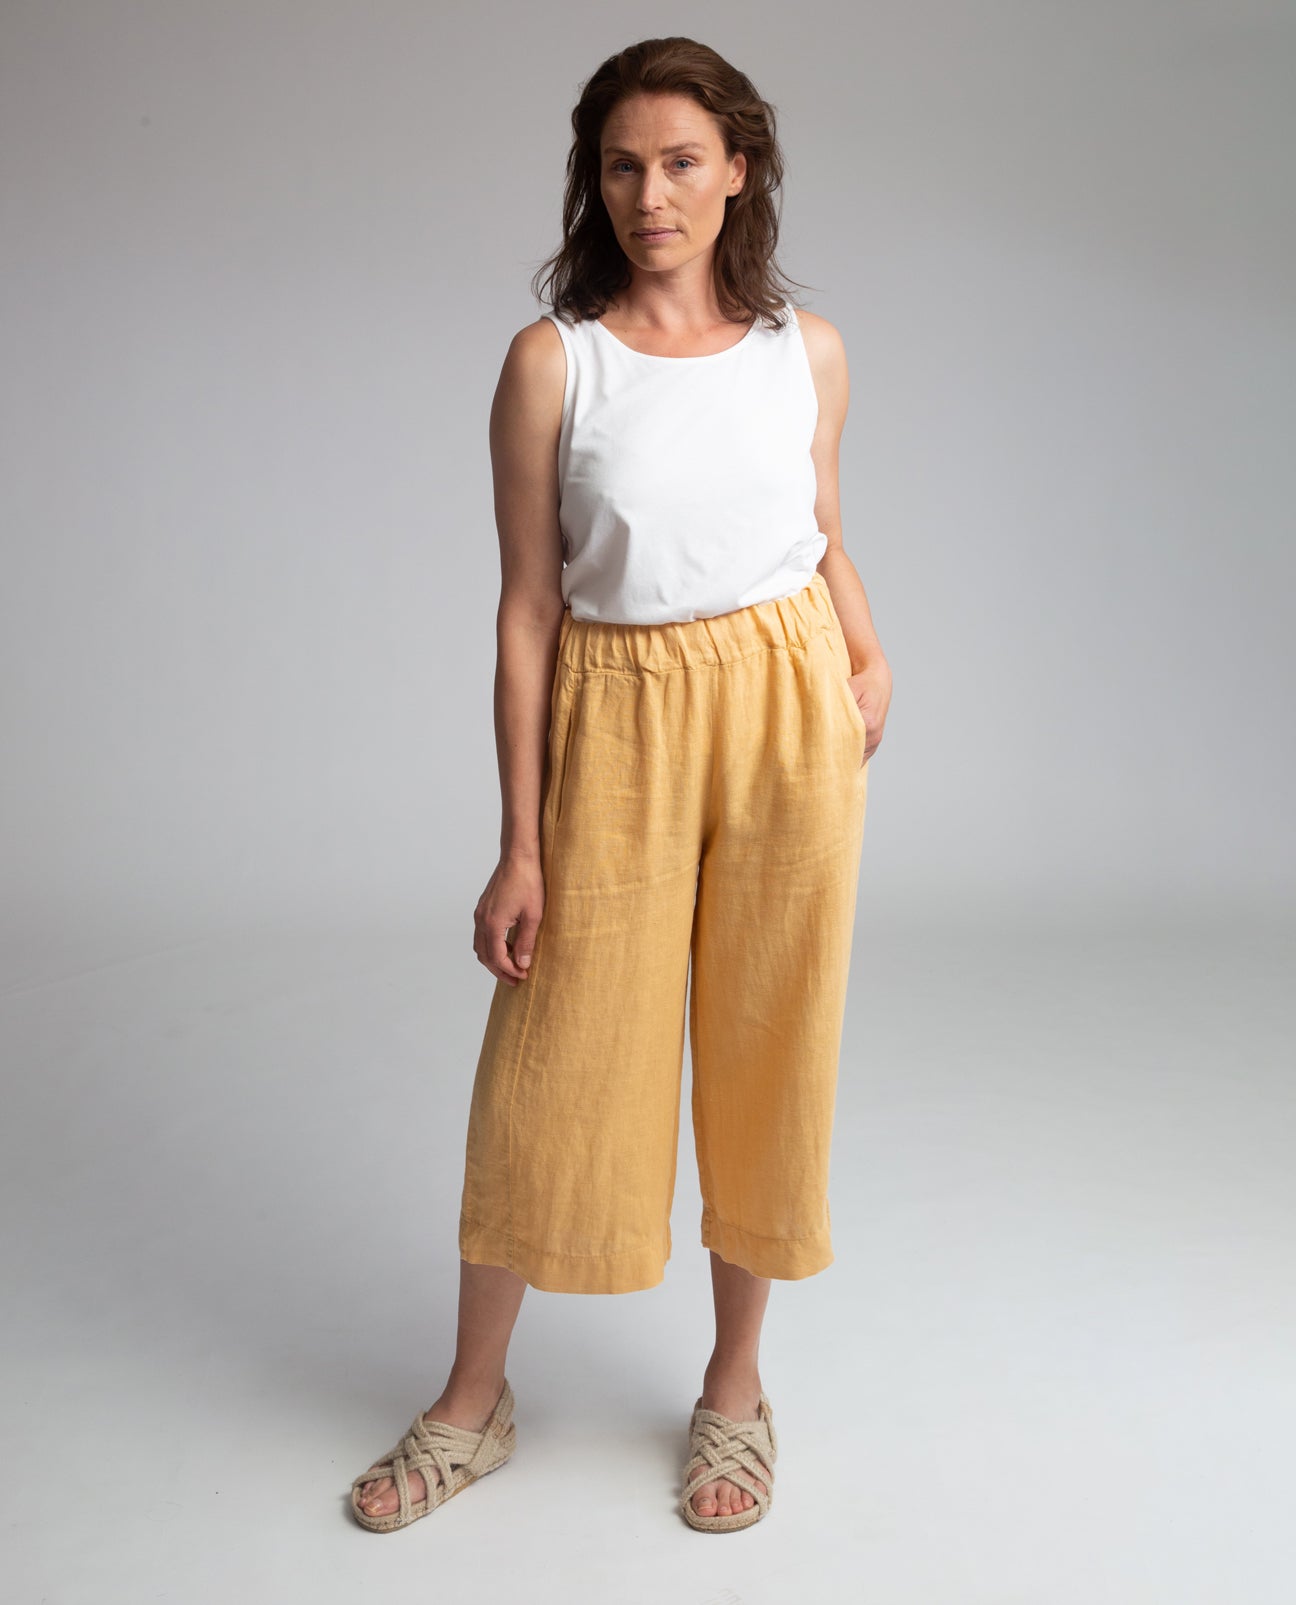 Nicole-May Linen Trousers in Sunflower